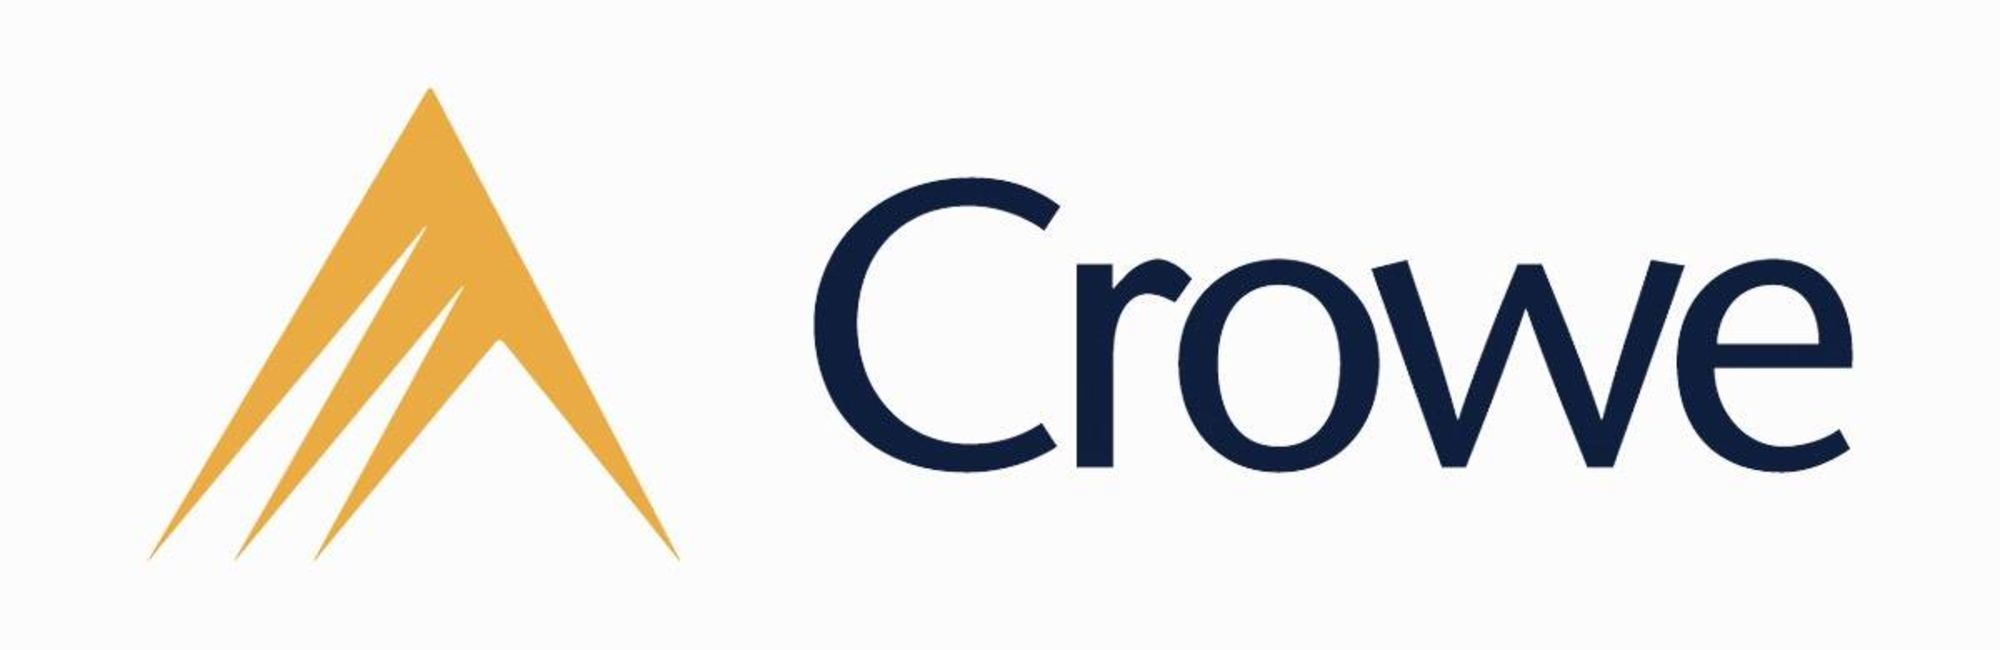 crowe-ireland-accounting-hotelsurvey-hotels-dublin-brexit-prices